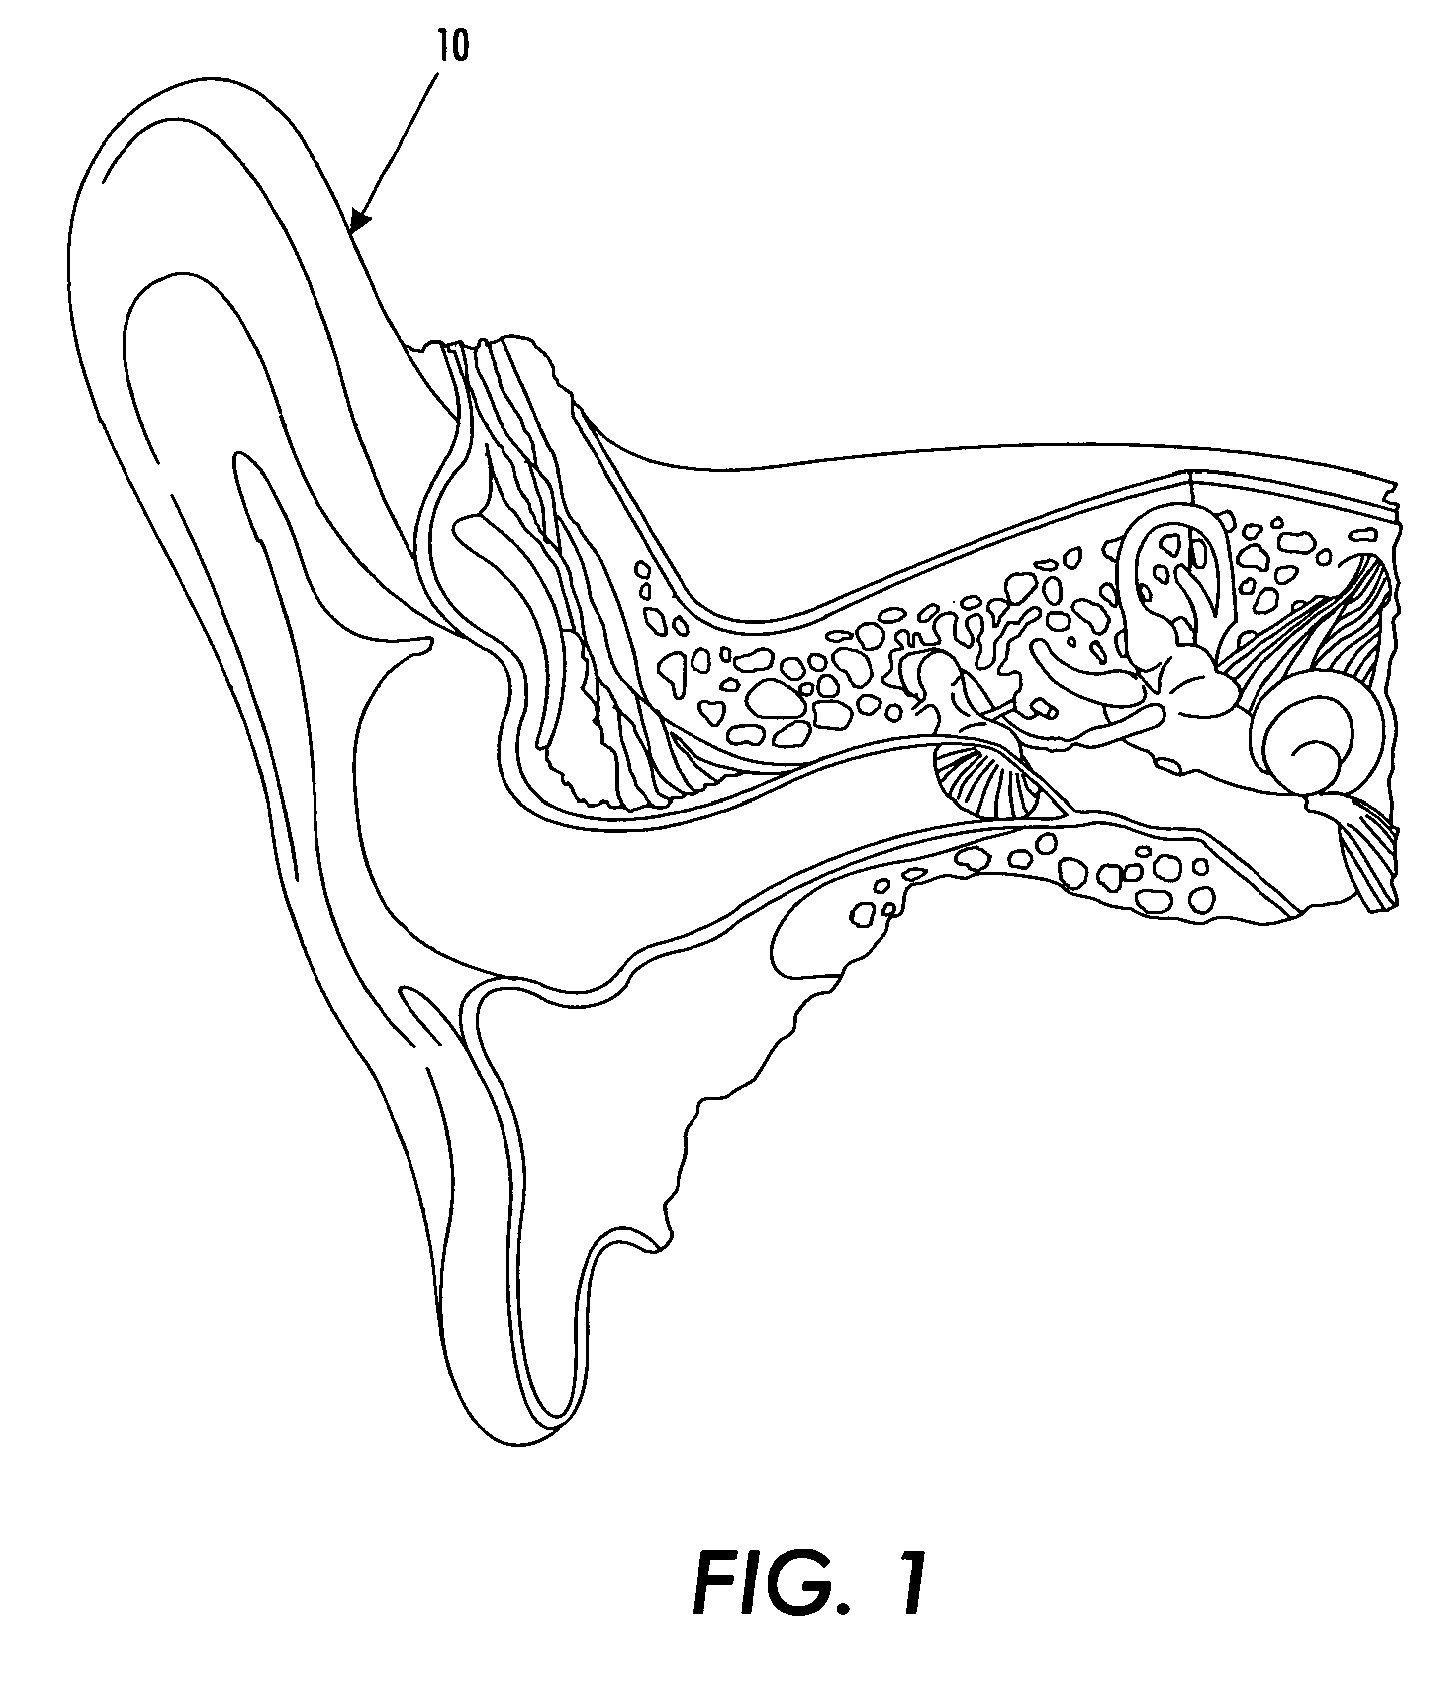 In the ear hearing aid utilizing annular acoustic seals